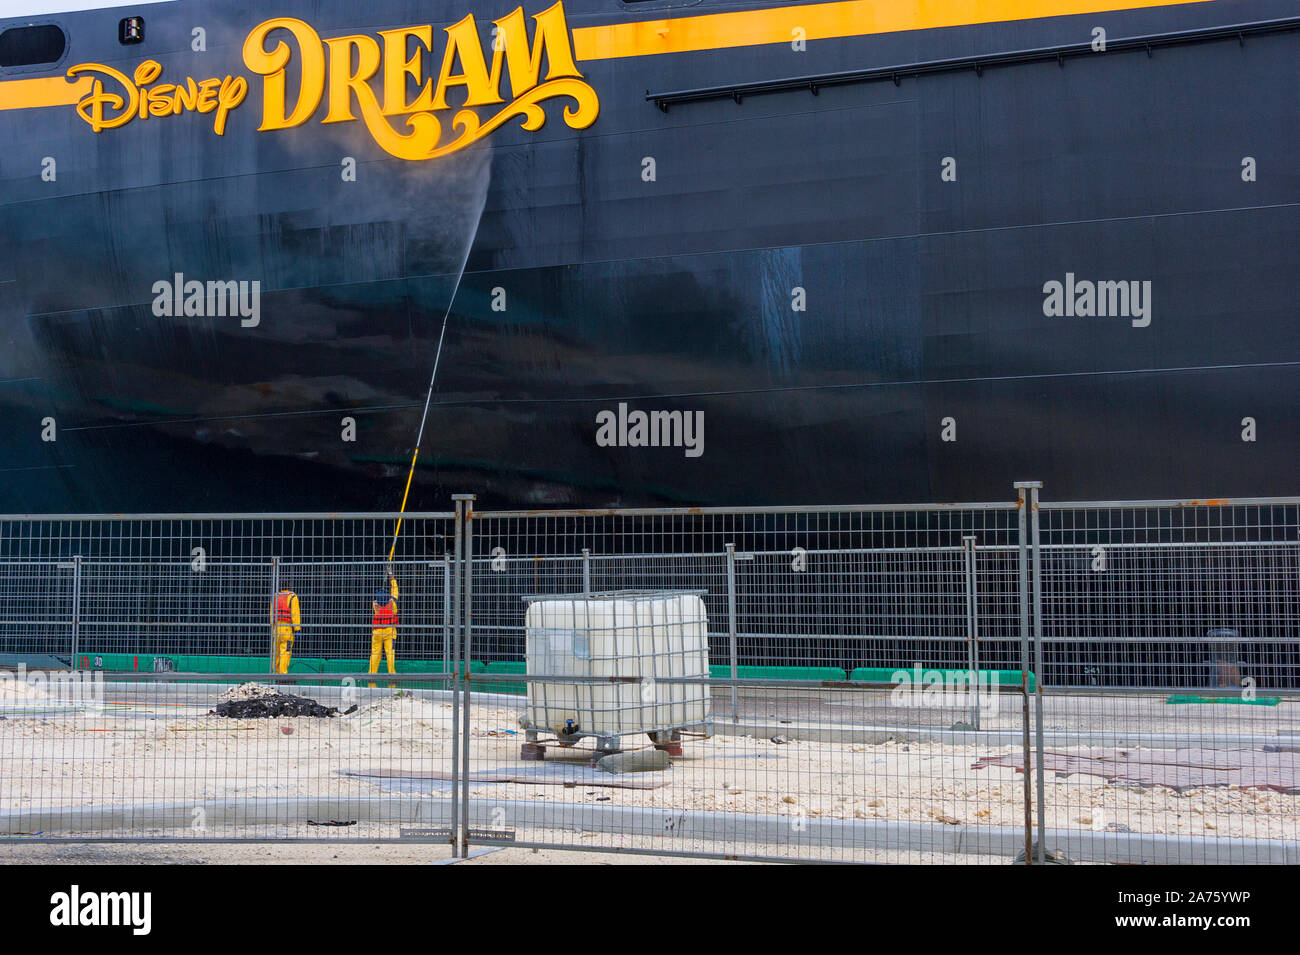 Nassau, Bahama - September 21,2019: Two men dressed in yellow with orange safety vest pressure wash Disney Dream Cruise Ship while docked at Prince Ge Stock Photo